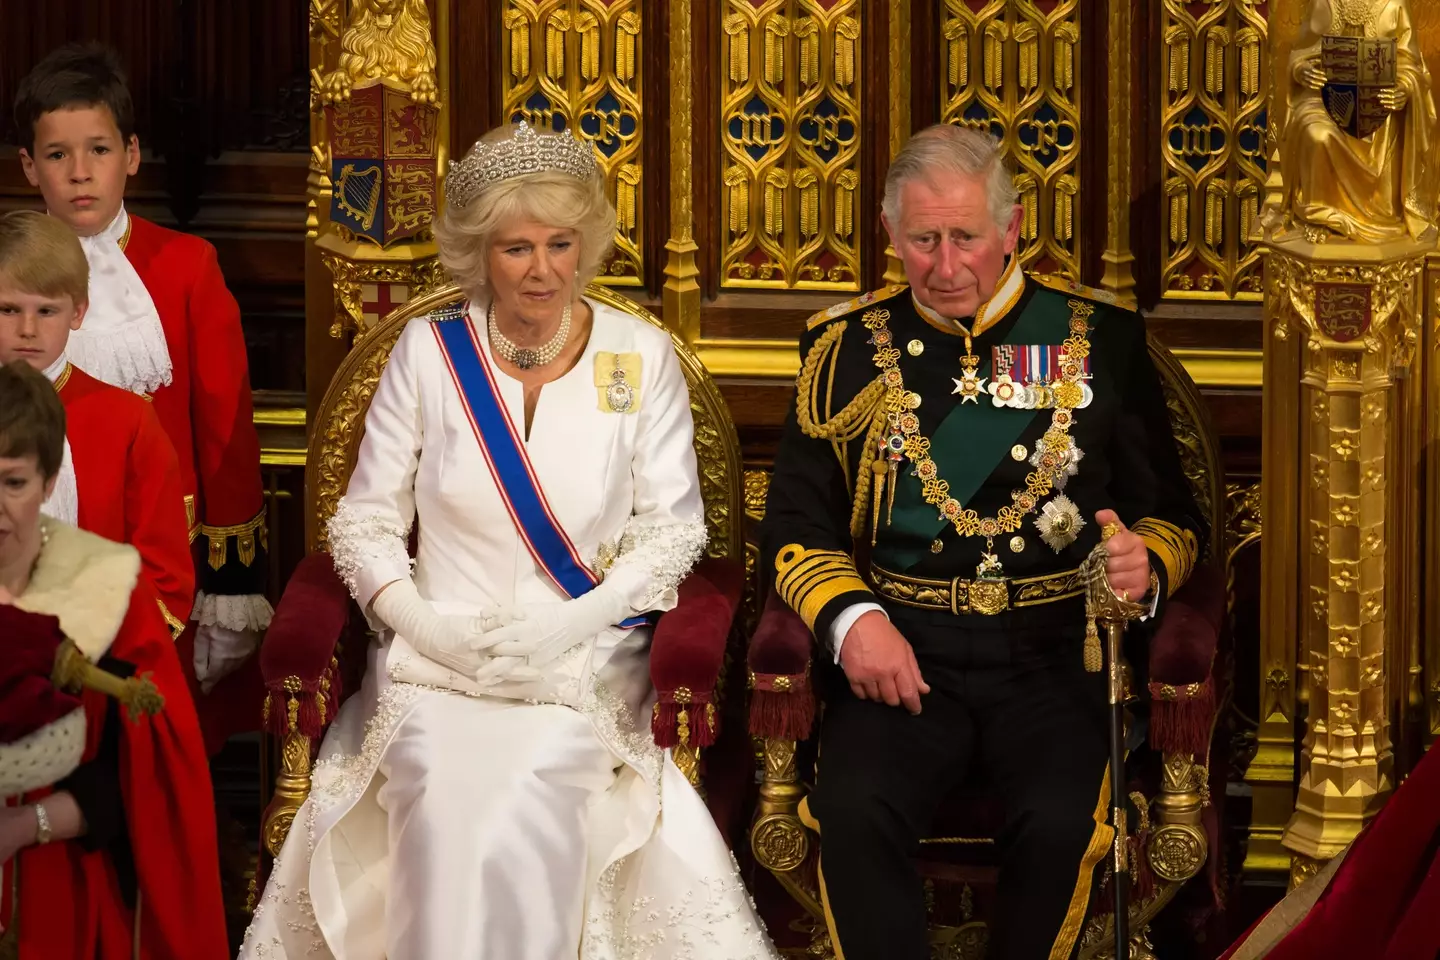 Camilla will be known as Queen Camilla and Charles officially becomes King.